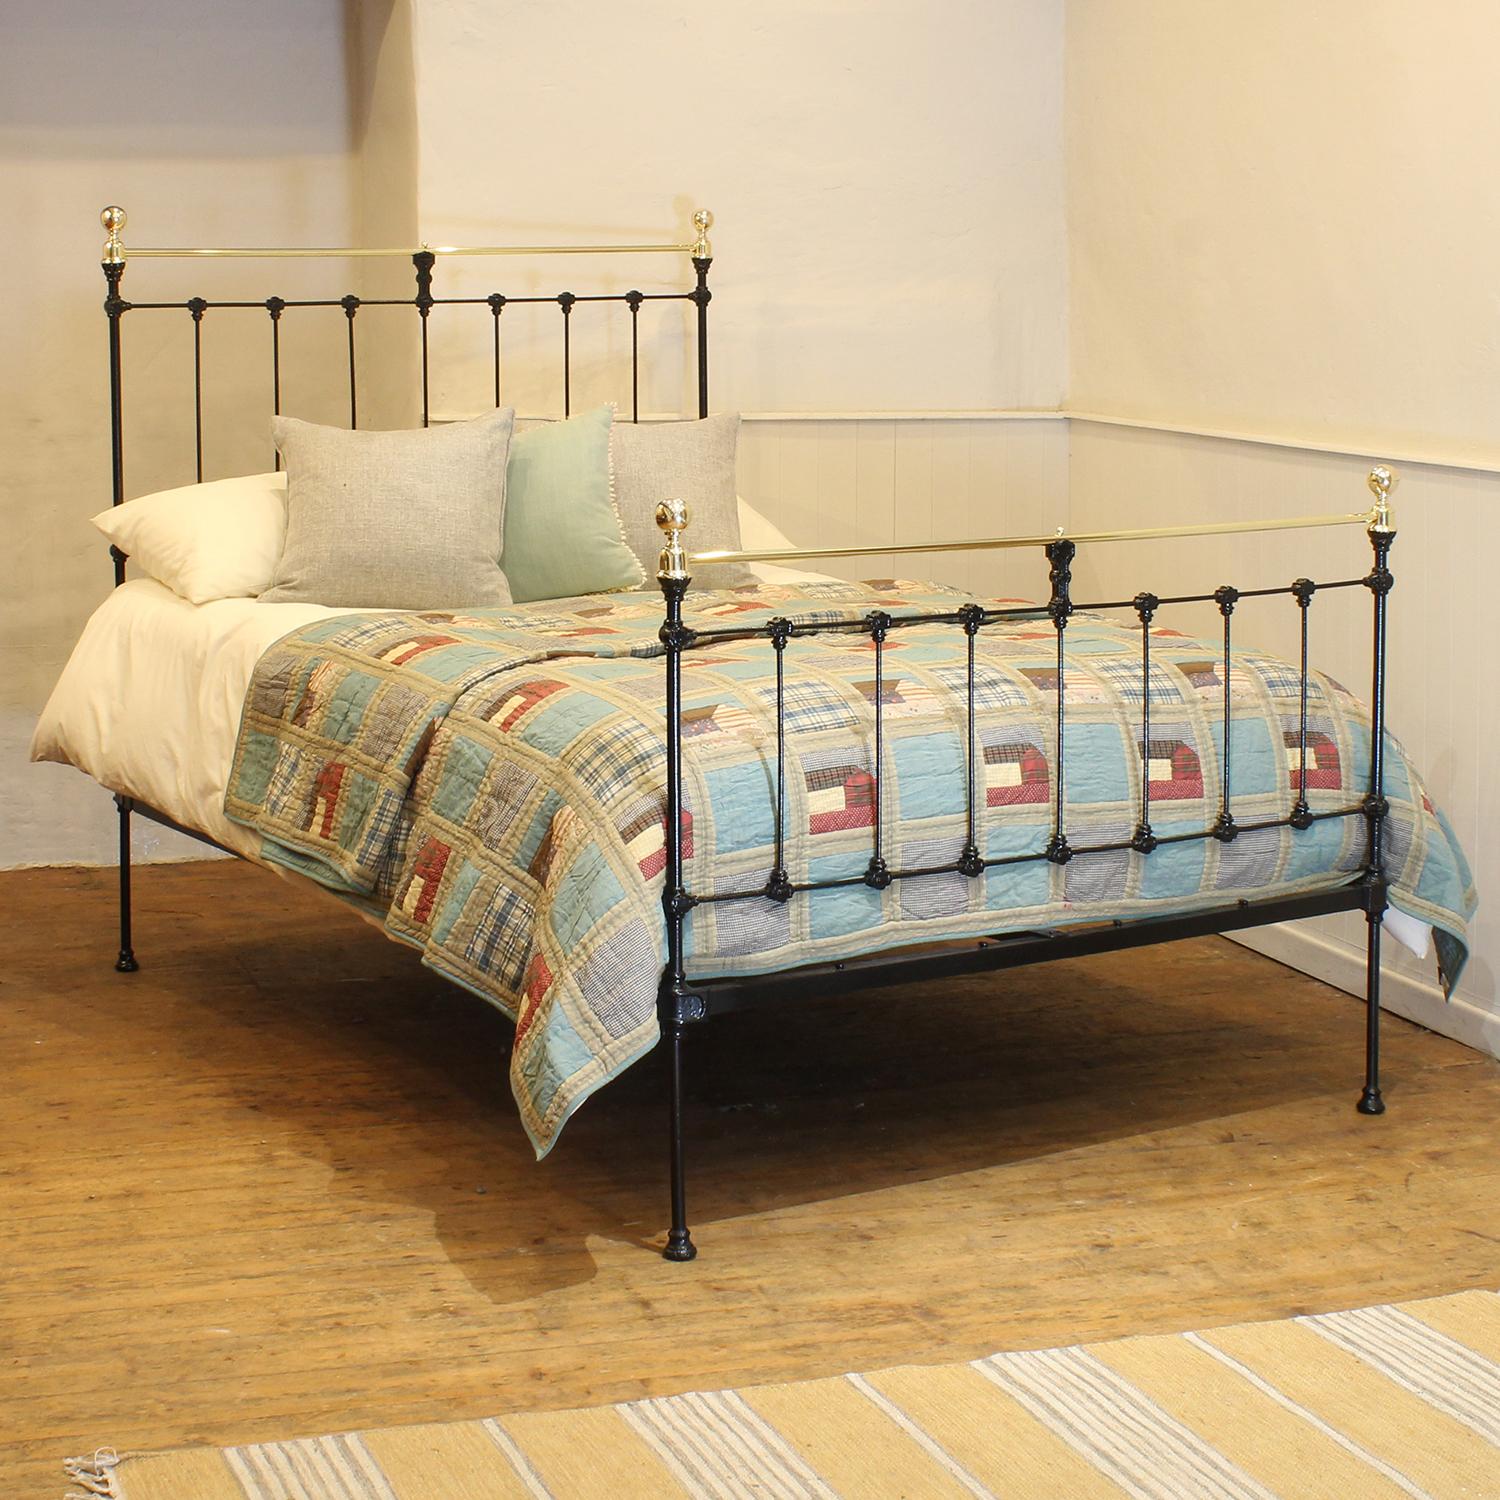 Victorian brass and cast iron bedstead finished in black with straight brass top rails and decorative castings.

This bed accepts a double size 4ft 6in wide (54 inch or 135cm) base and mattress. 

The price includes a firm standard bed base to